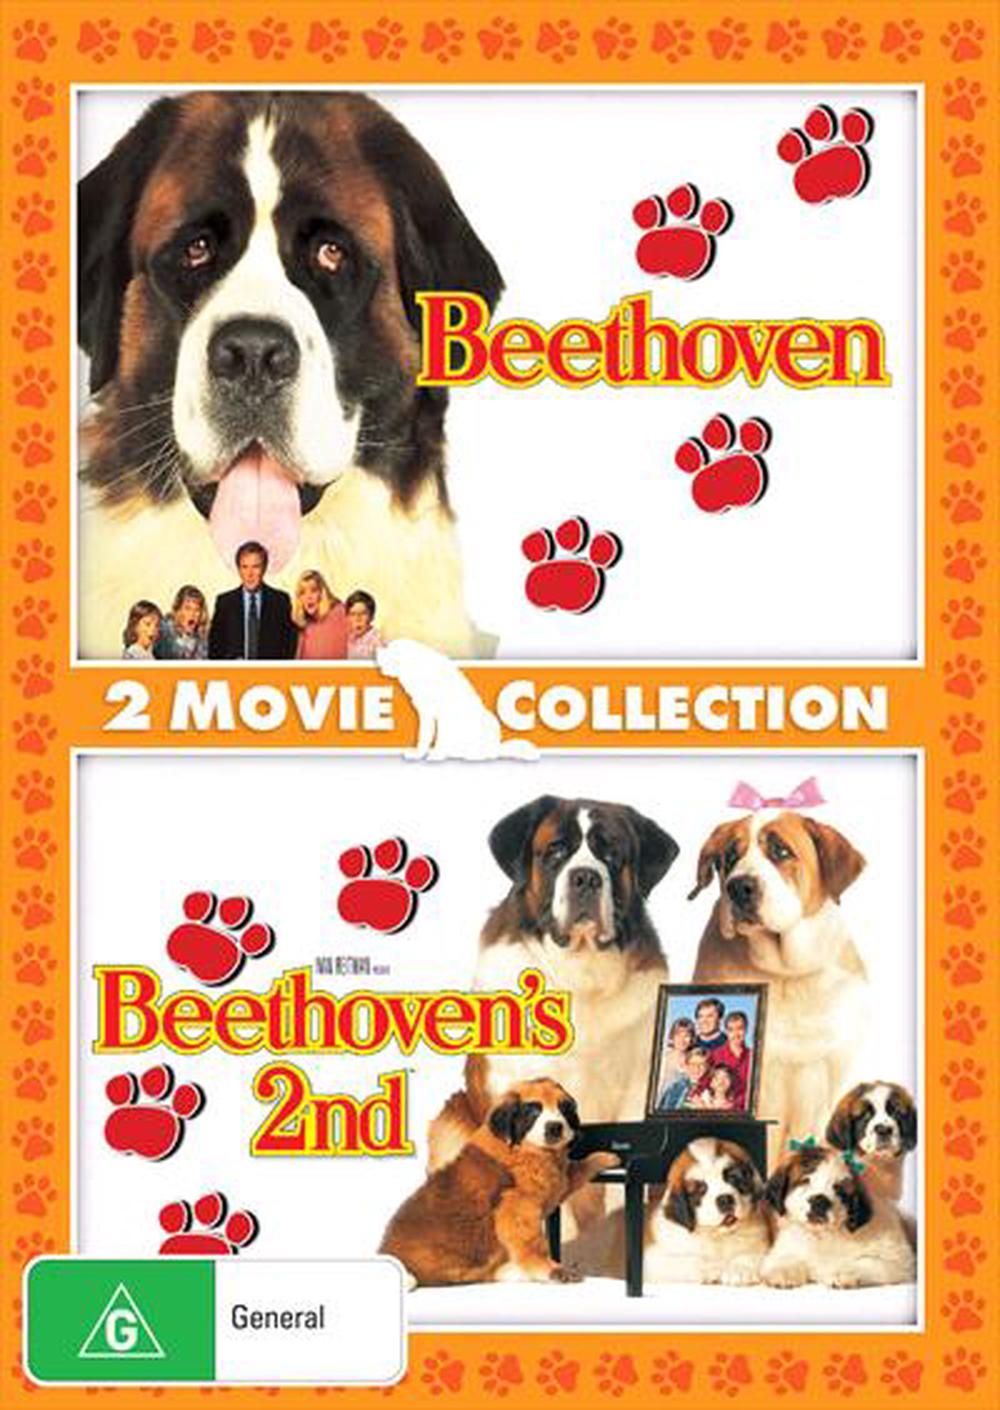 Beethoven / Beethoven's 2nd, DVD | Buy online at The Nile